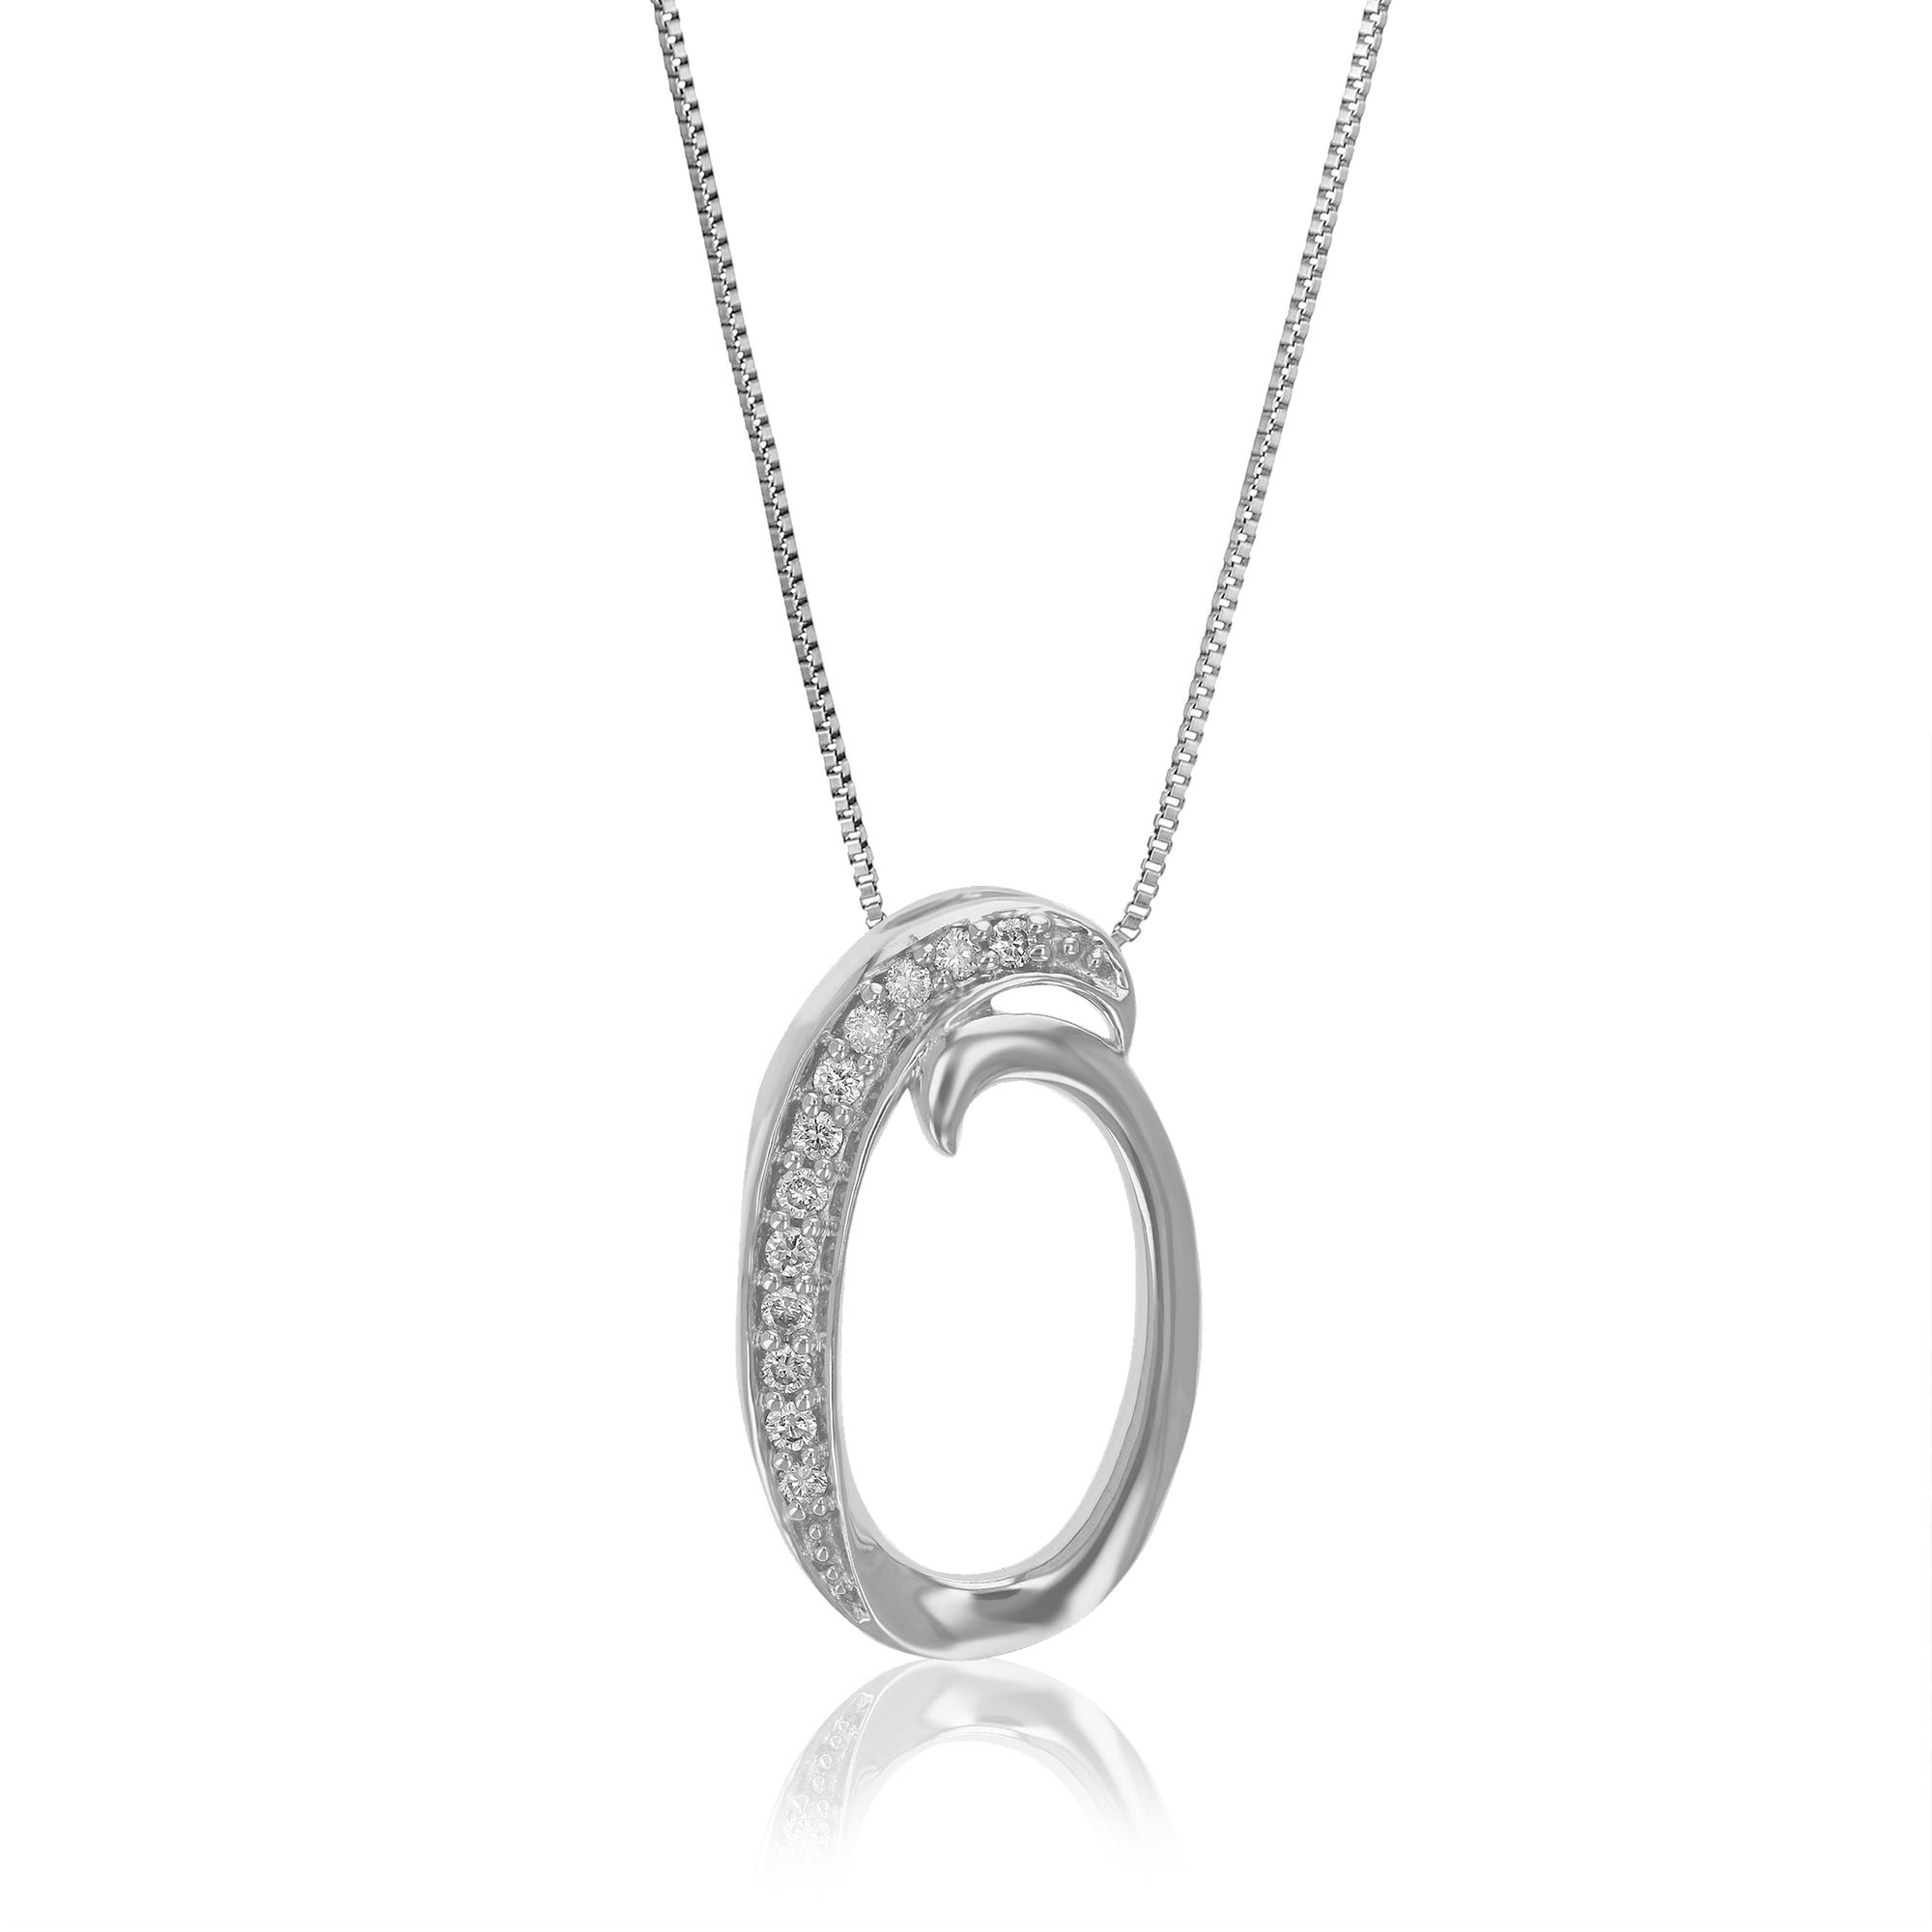 1/10 cttw Diamond Pendant Necklace for Women, Lab Grown Diamond Letter O Pendant Necklace in .925 Sterling Silver with Chain, Size 3/4 Inch